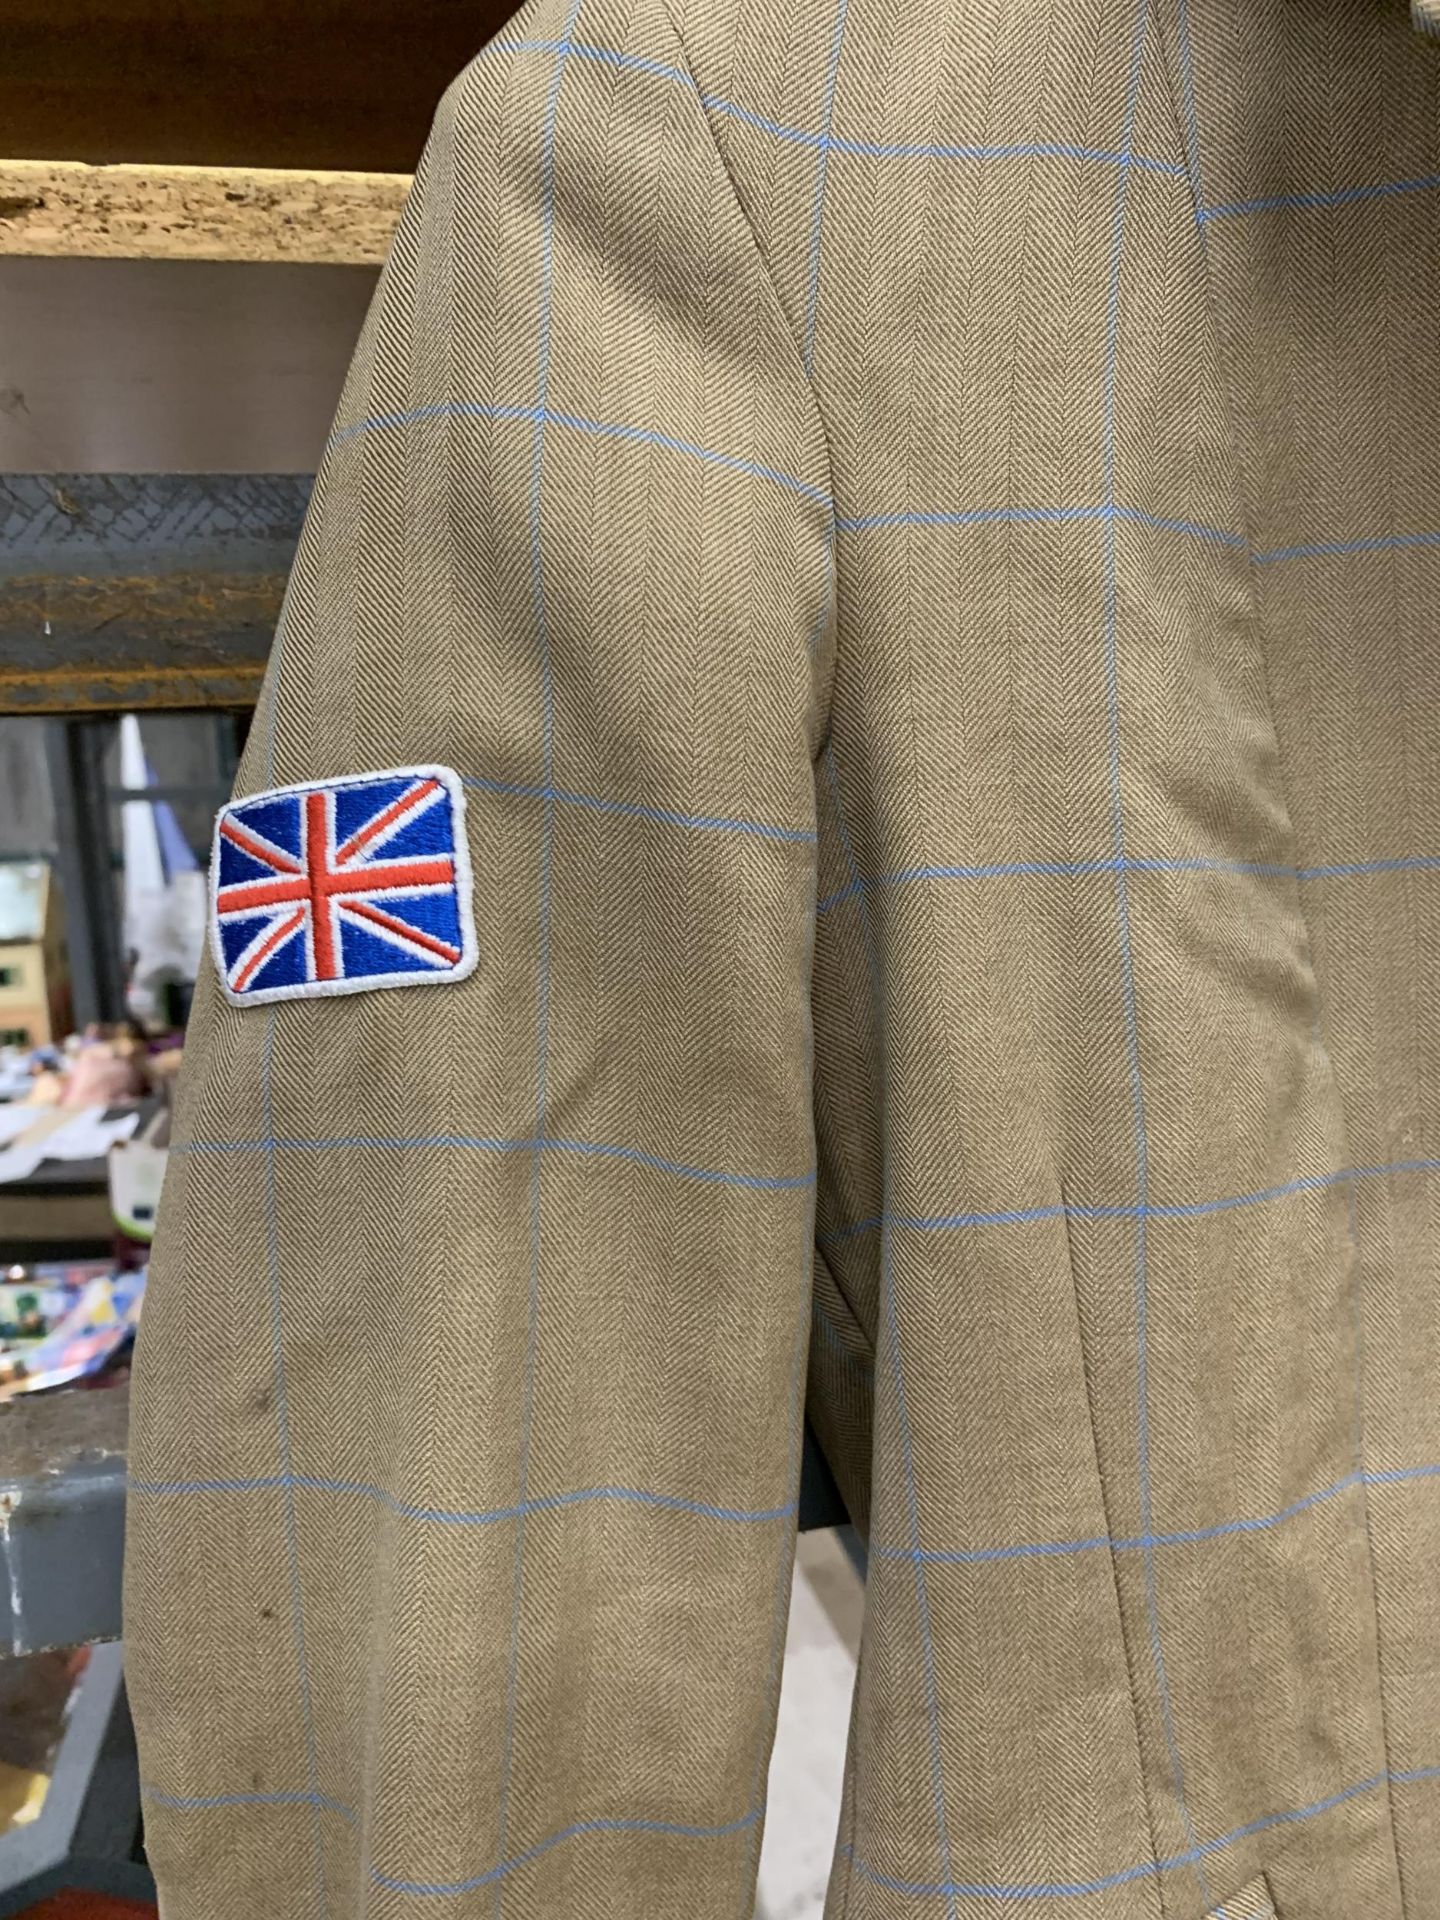 AN EQUIPORT SIZE 8 SHOWING JACKET, TWEED STYLE PATTERN, UNION JACK BADGE ON THE ARM, BACK VENTS, - Image 2 of 3